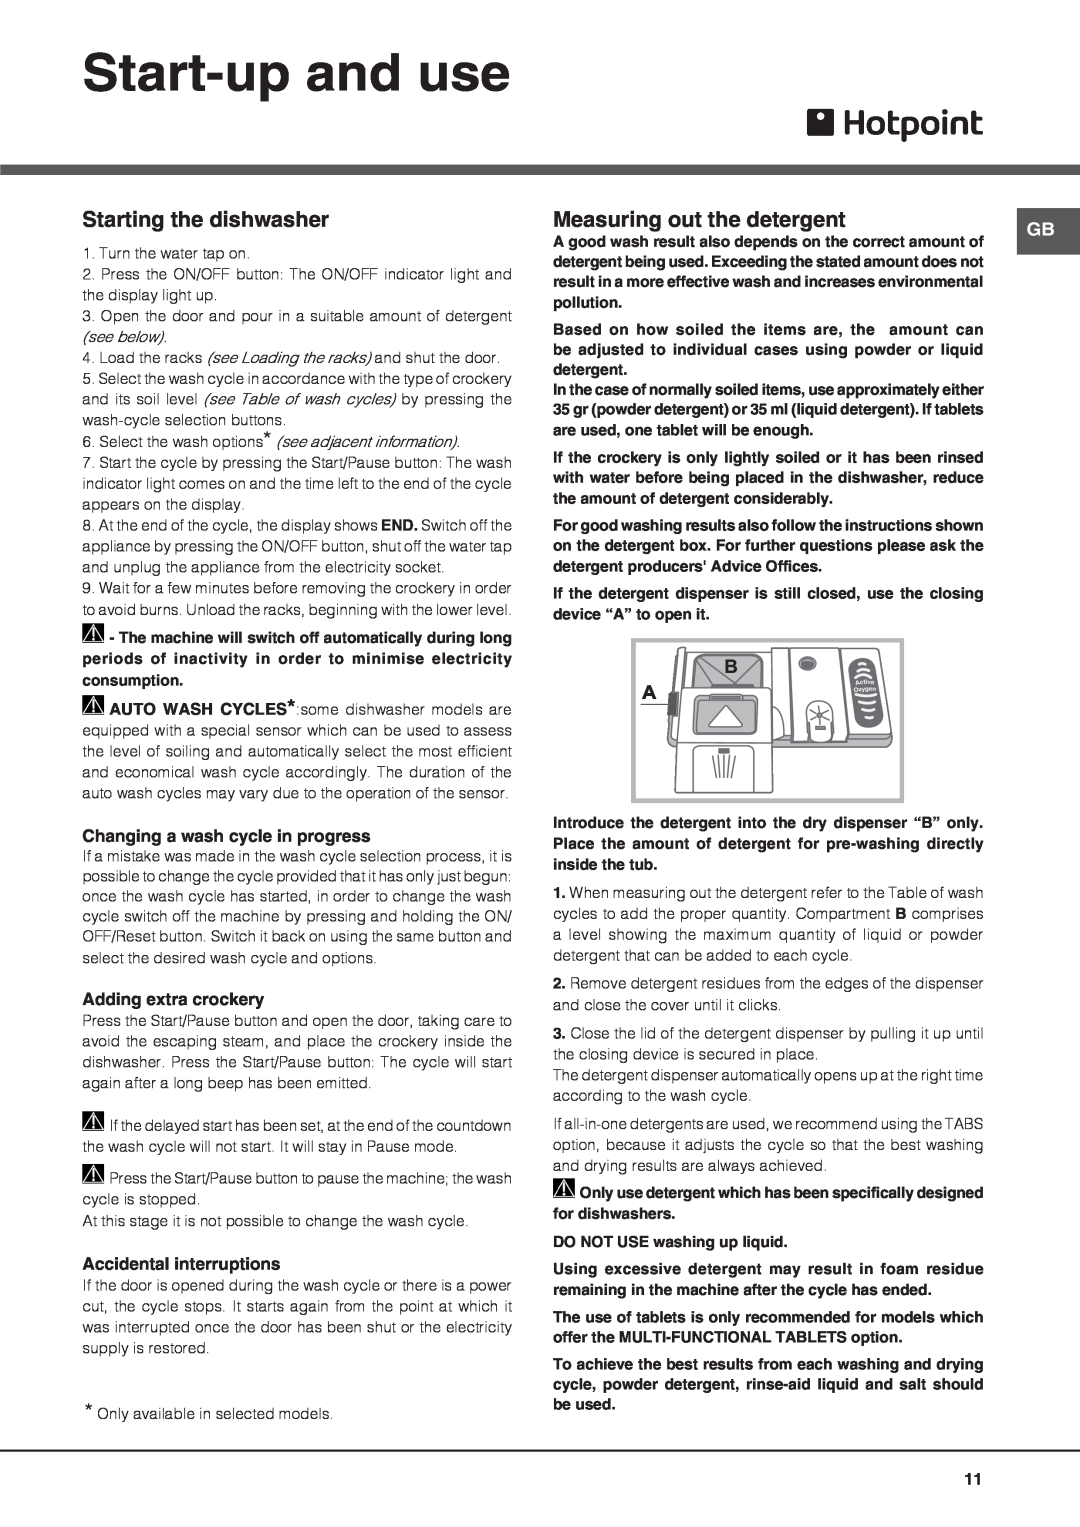 Hotpoint FDYF 11011 Start-upand use, Changing a wash cycle in progress, Adding extra crockery, Accidental interruptions 